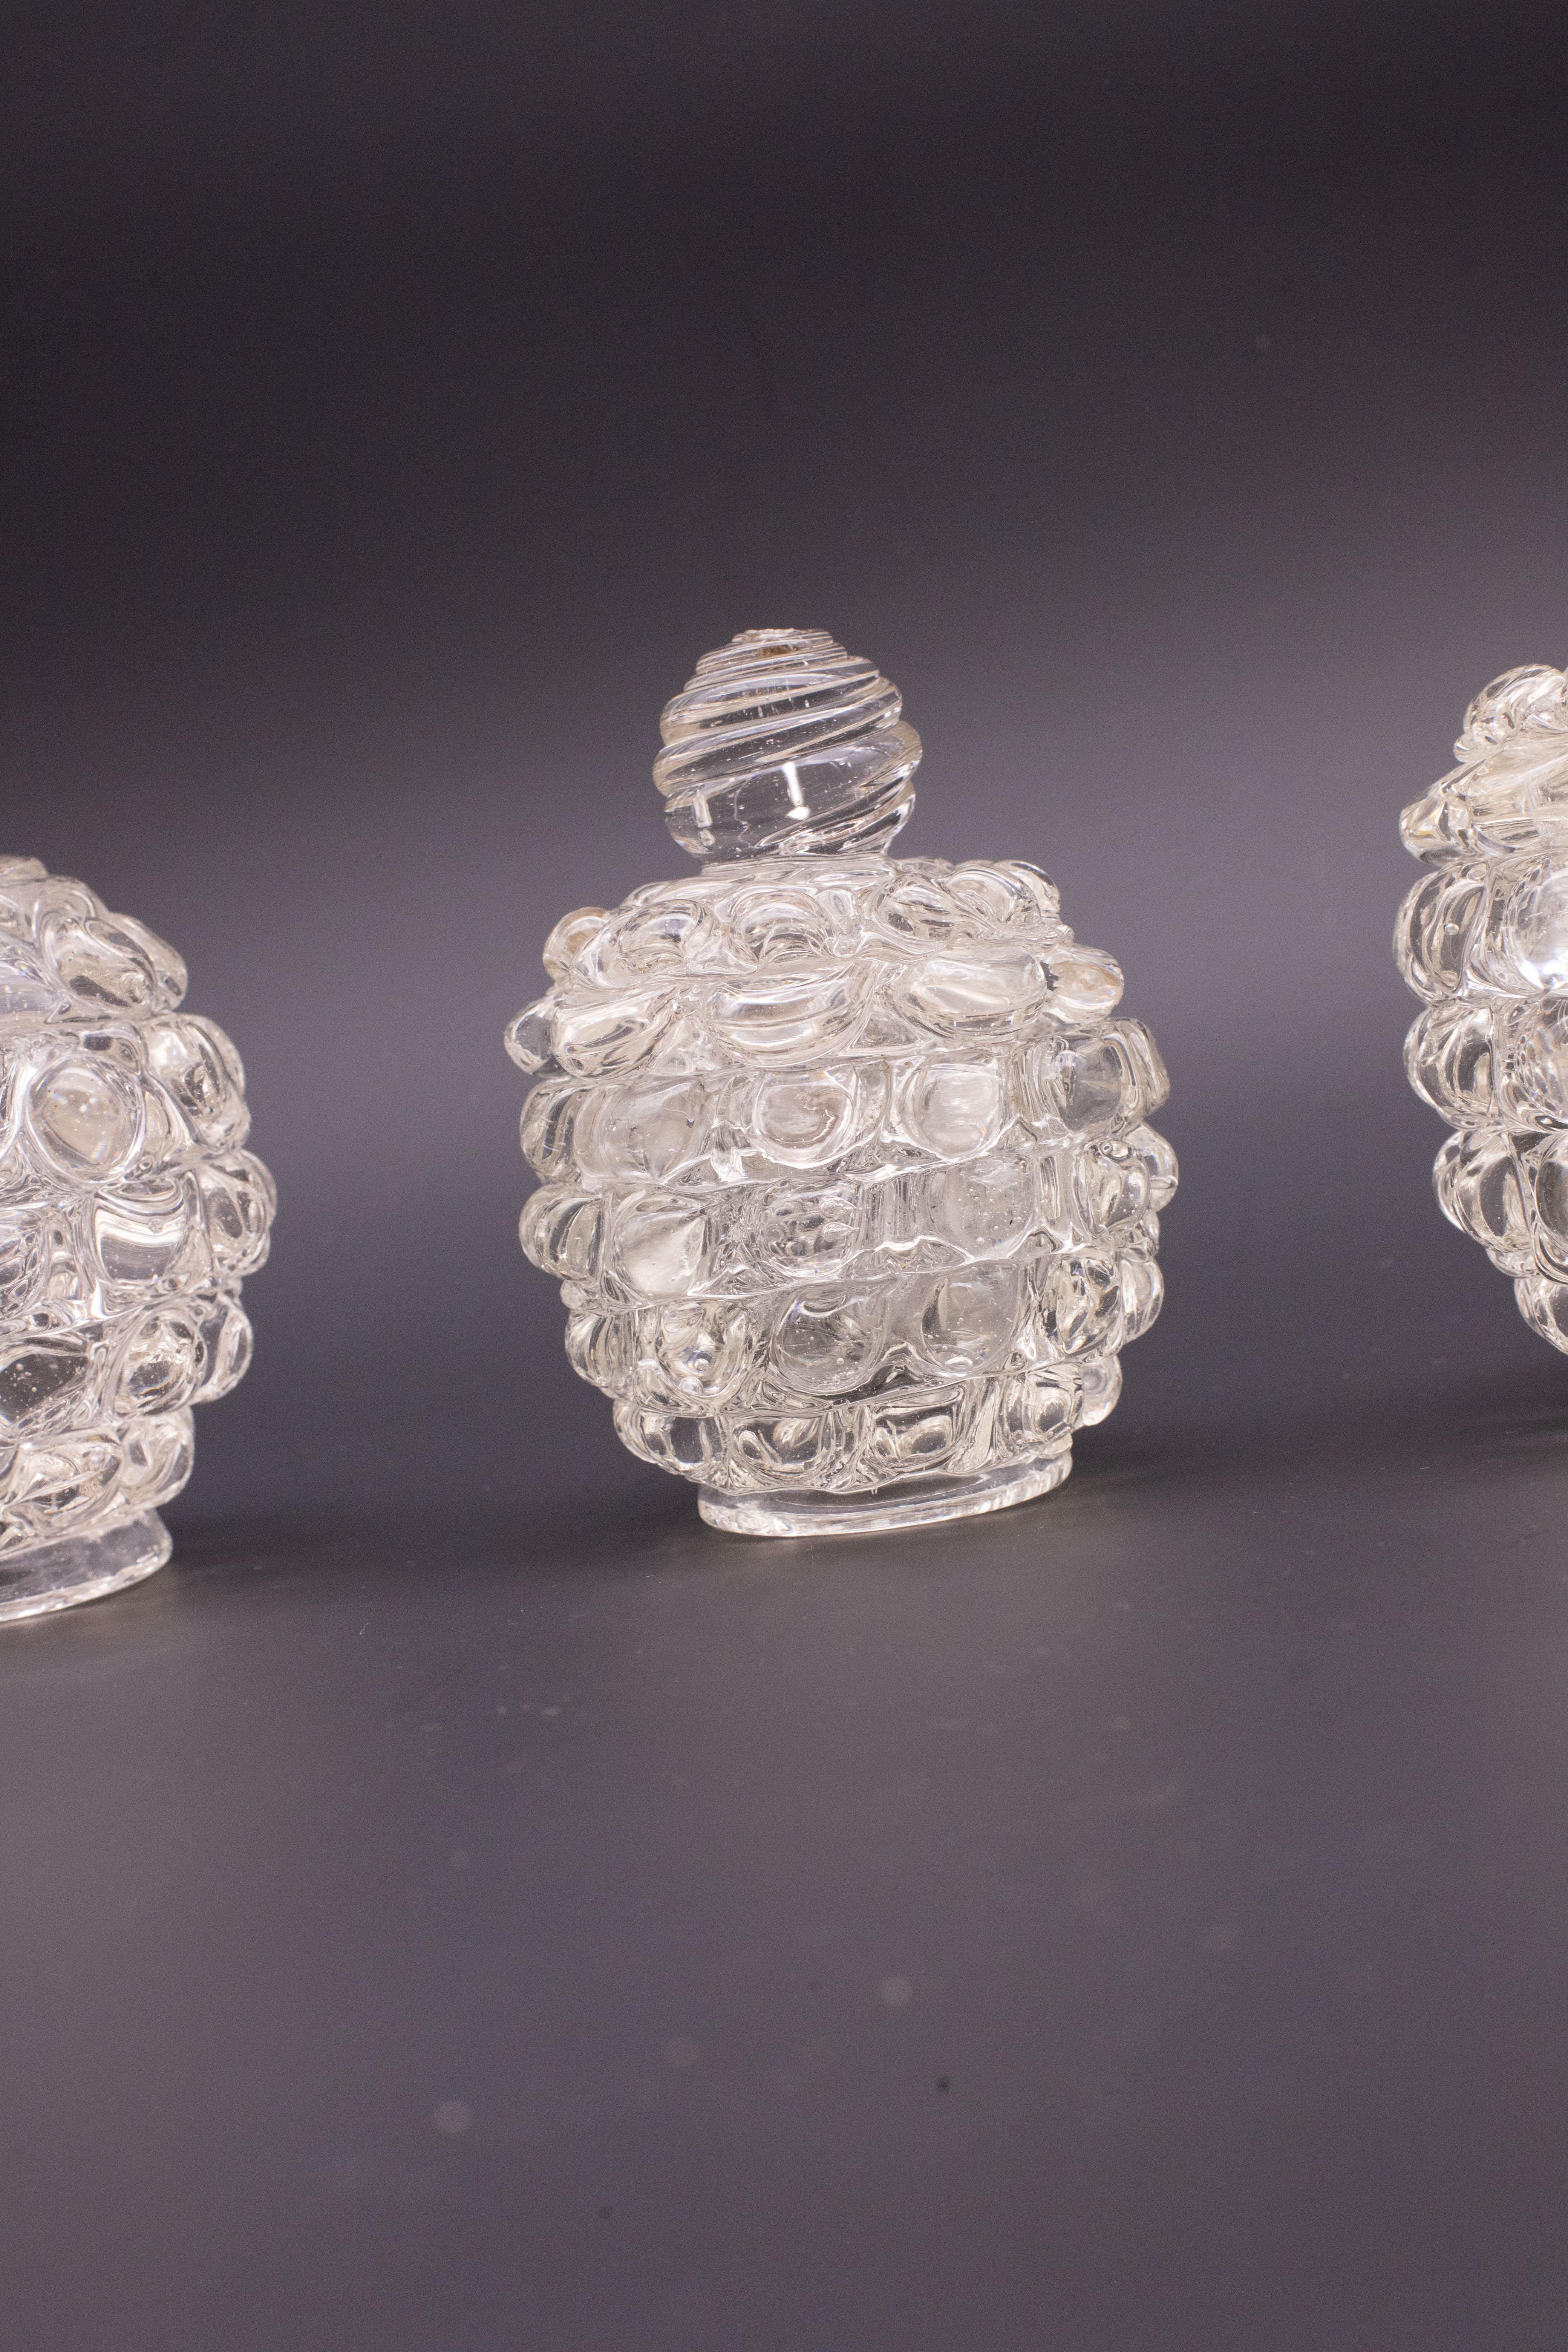 Mid-20th Century Set of 3 Series Lenti Vase Barovier & Toso Italy, Murano Glass, 1940s For Sale